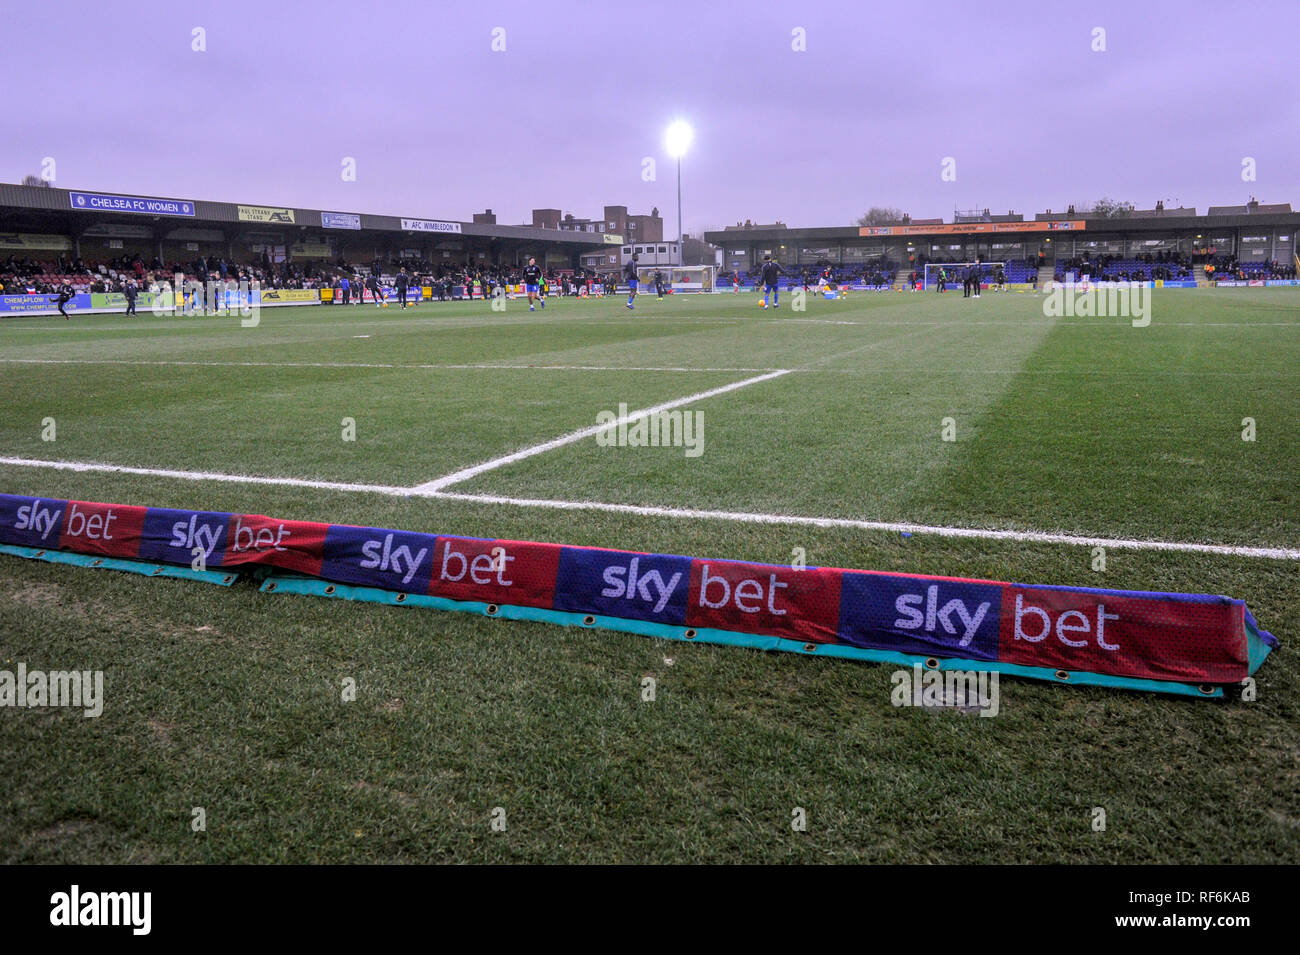 The Cherry Reds Records Stadium before the League One match between  AFC Wimbledon and Barnsley at the Cherry Red Records Stadium . 19 January 2019 Editorial use only. No merchandising. For Football images FA and Premier League restrictions apply inc. no internet/mobile usage without FAPL license - for details contact Football Dataco Stock Photo